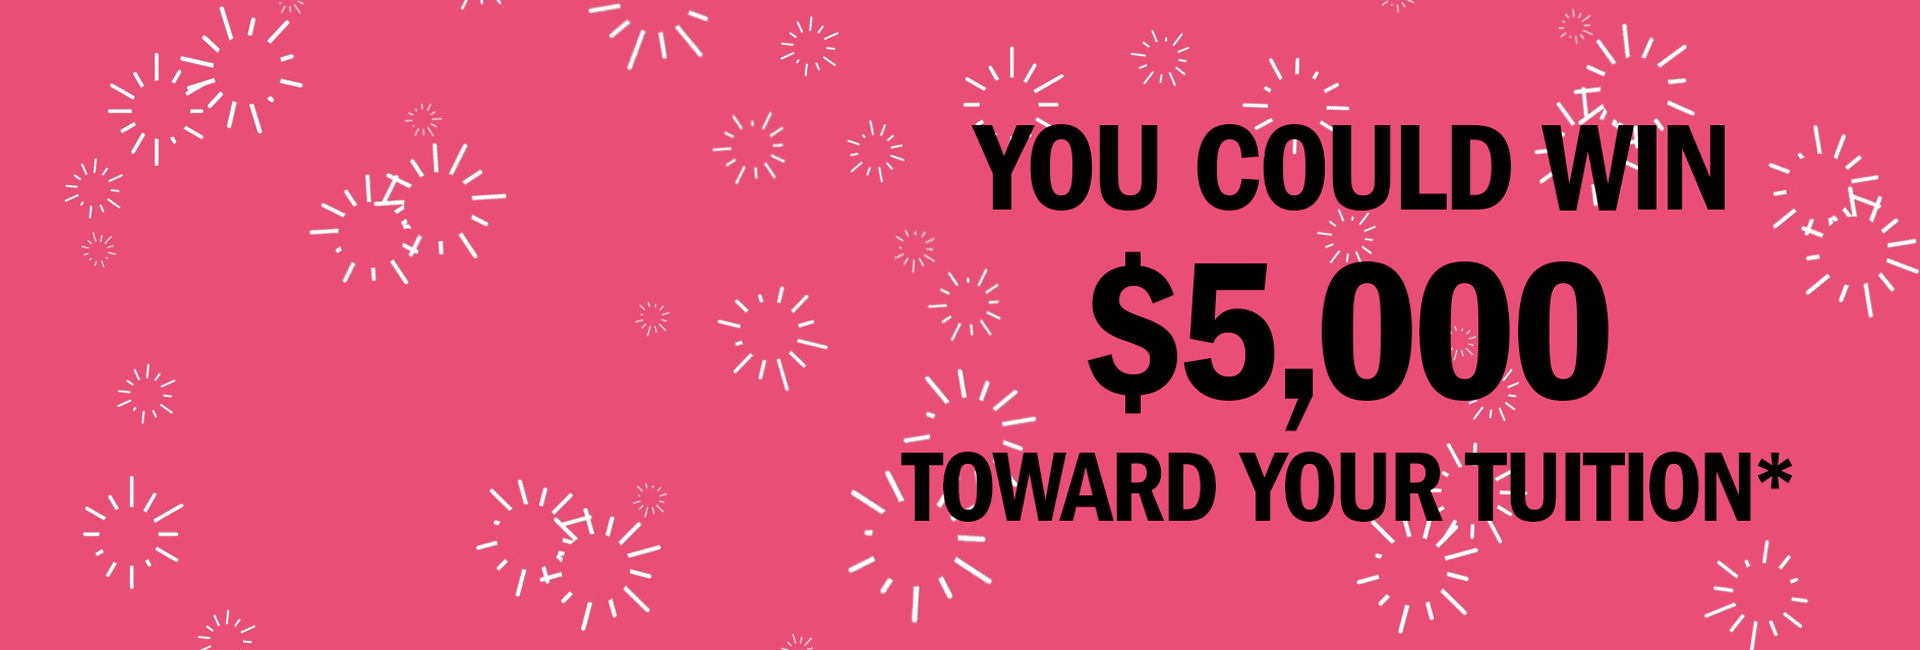 You could win $5,000 toward your tuition